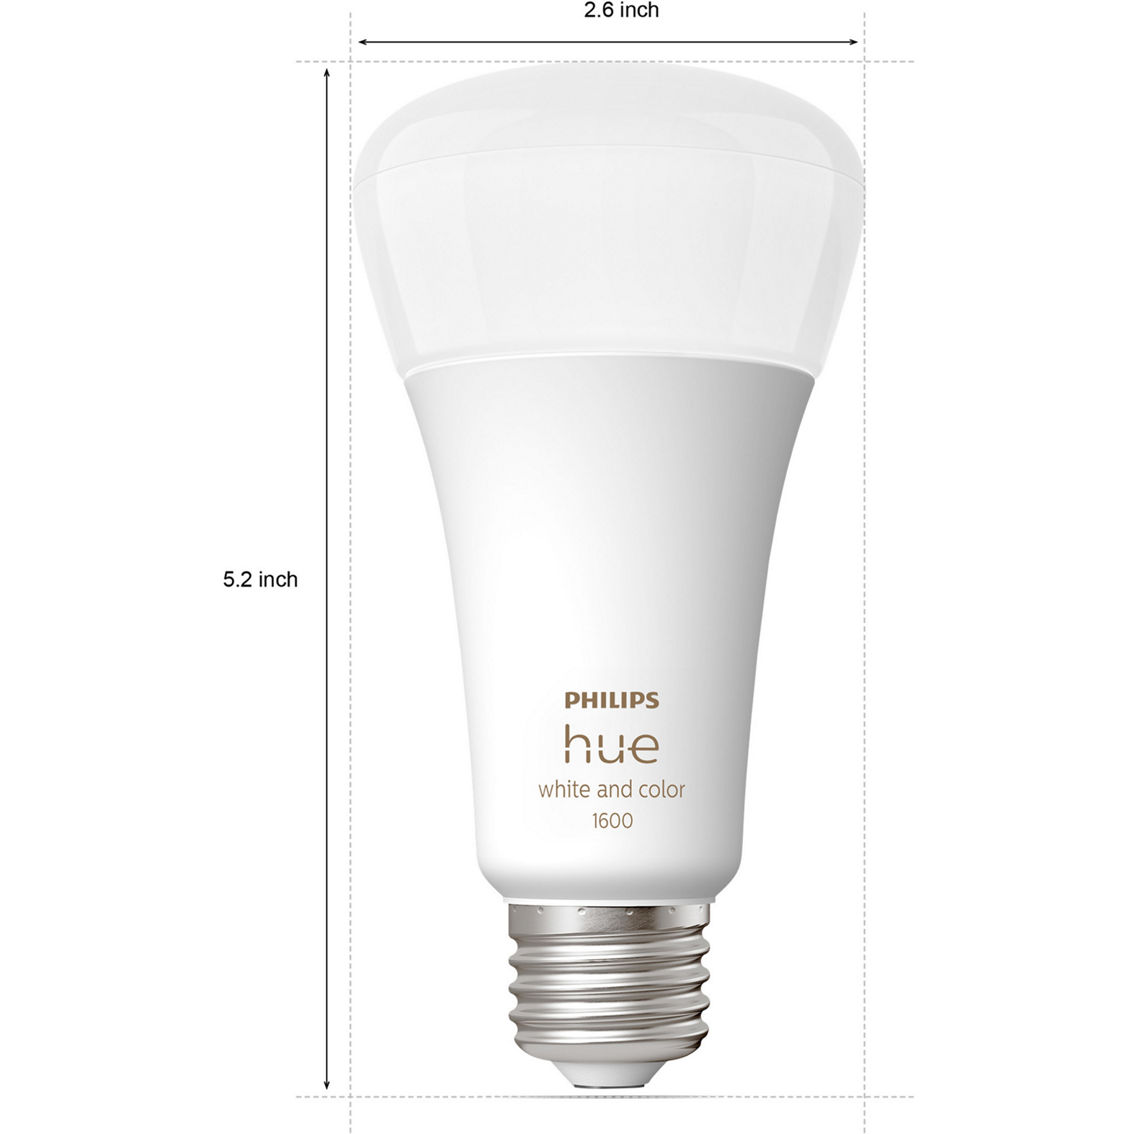 Philips Hue 100W A21 LED Smart Bulb - White and Color Ambiance - Image 7 of 7